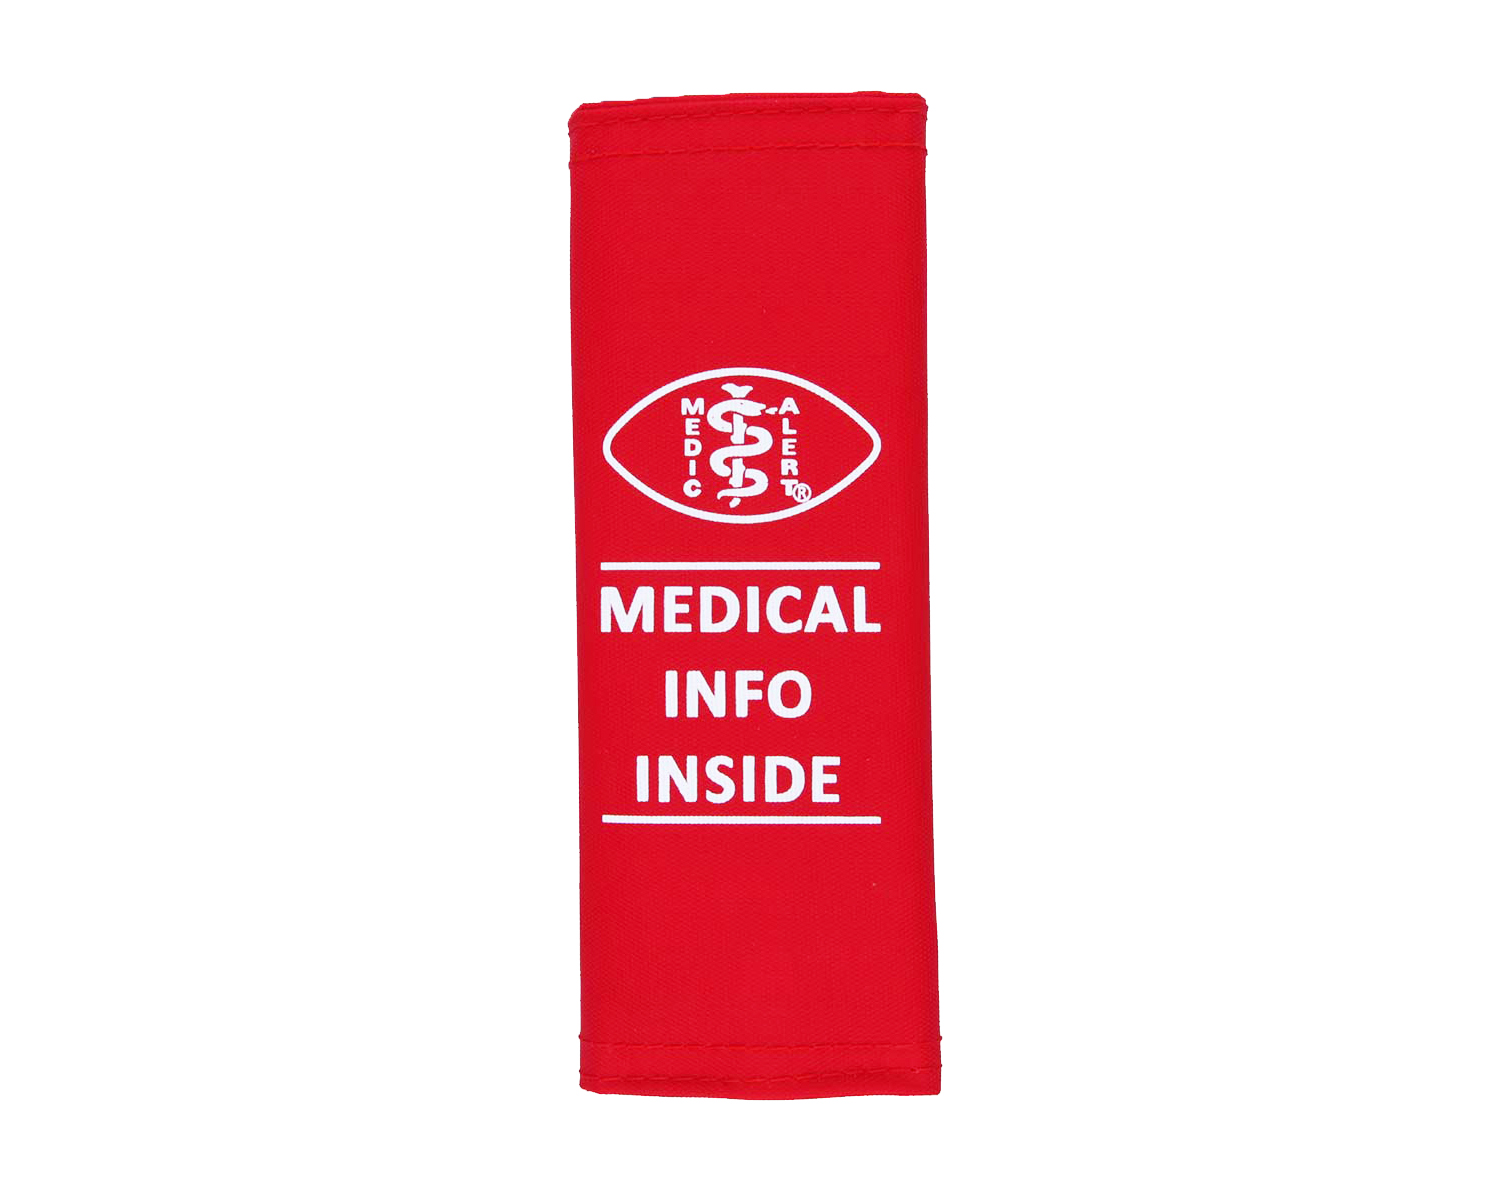 Red document holder with a white MedicAlert logo and text, medical information inside.